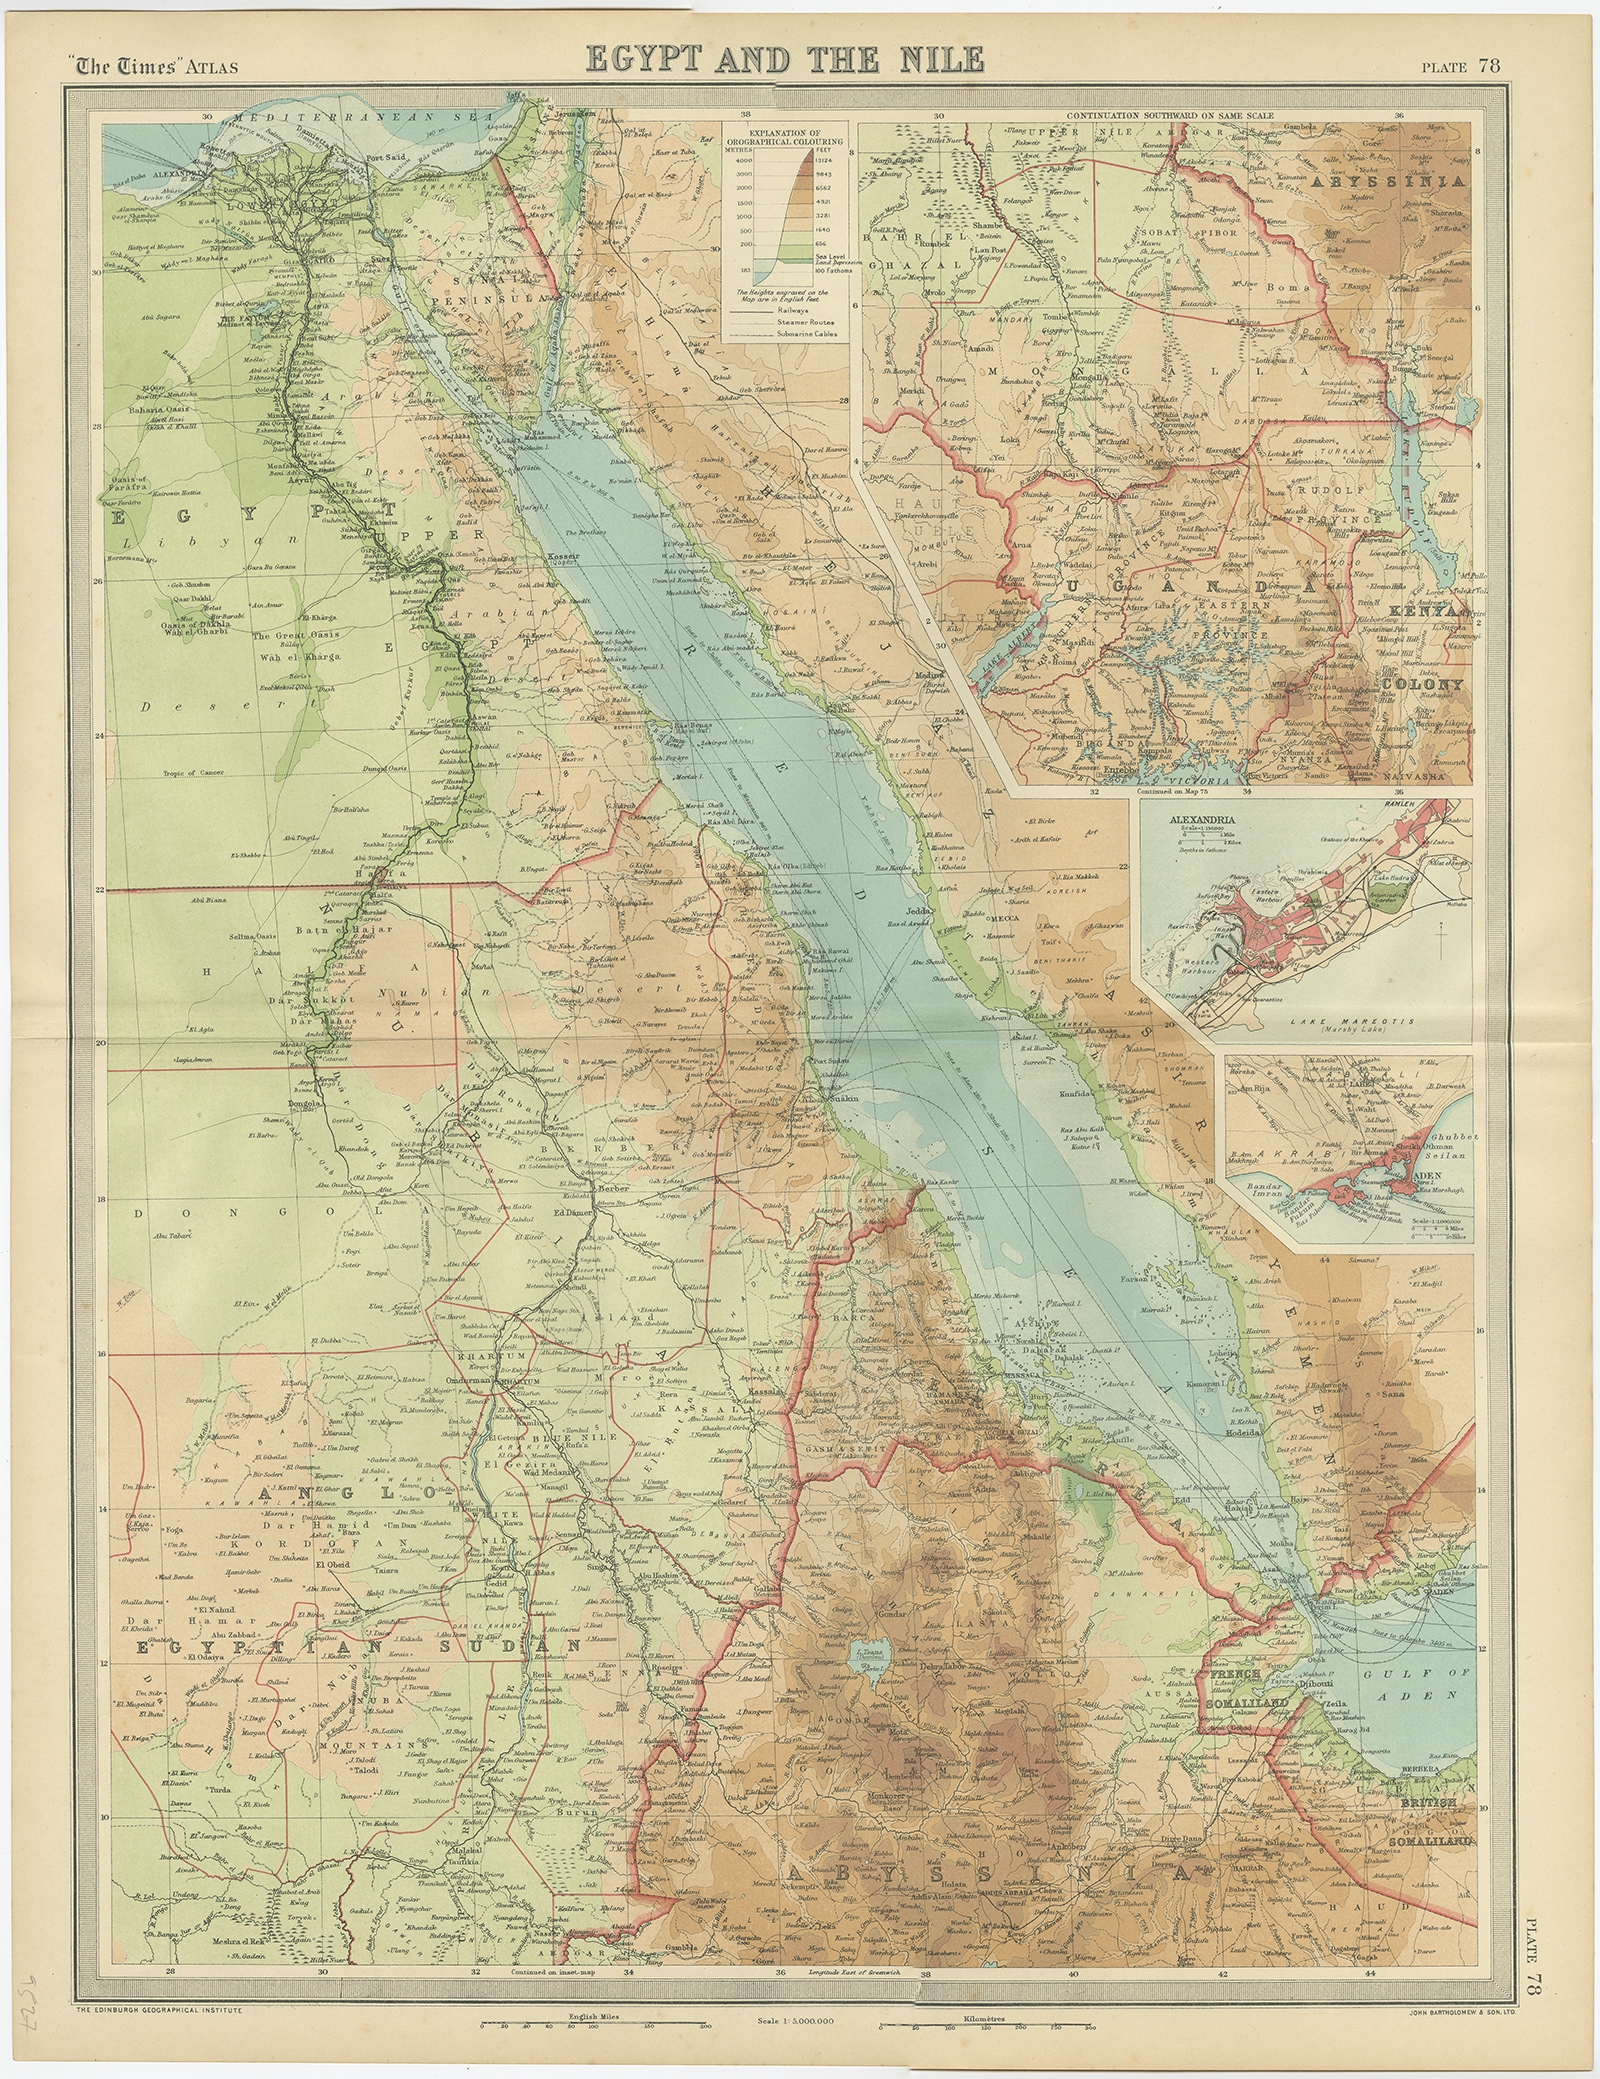 ancient nile river map